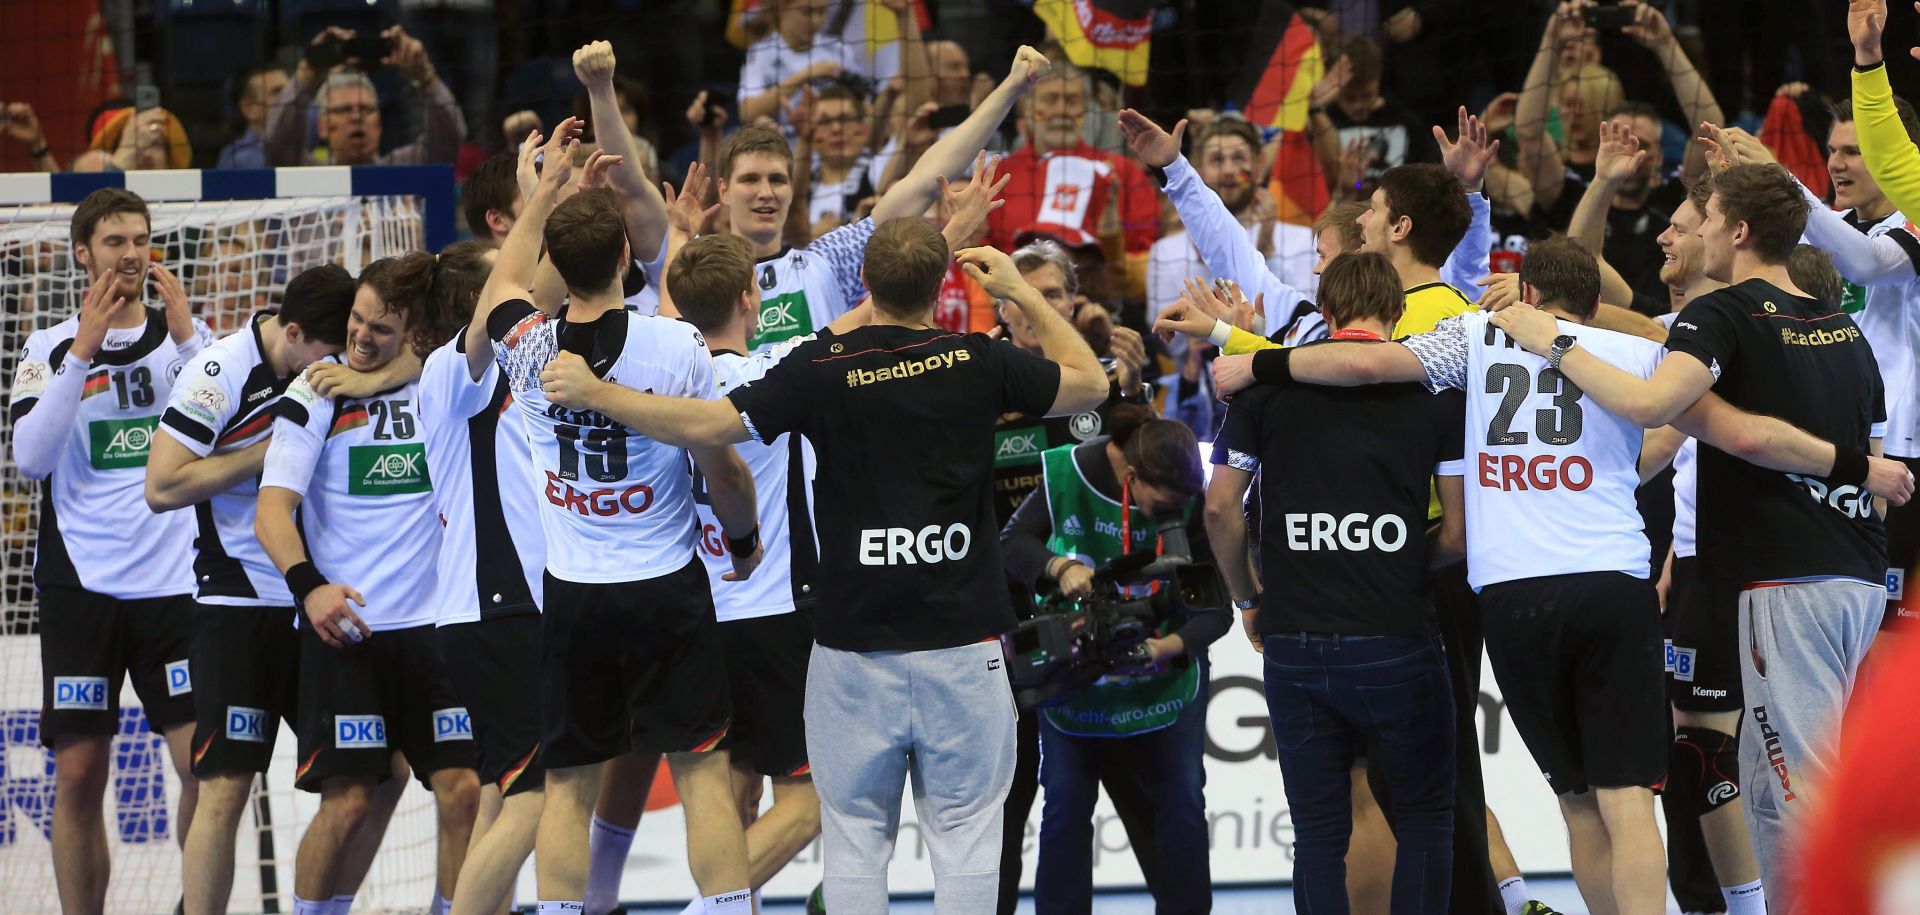 epa05137689 Germany's players celebrate after winning the final of the 2016 EHF European Men's Handball Championship between Germany and Spain at the Tauron Arena in Krakow, Poland, 31 January 2016.  EPA/JENS WOLF